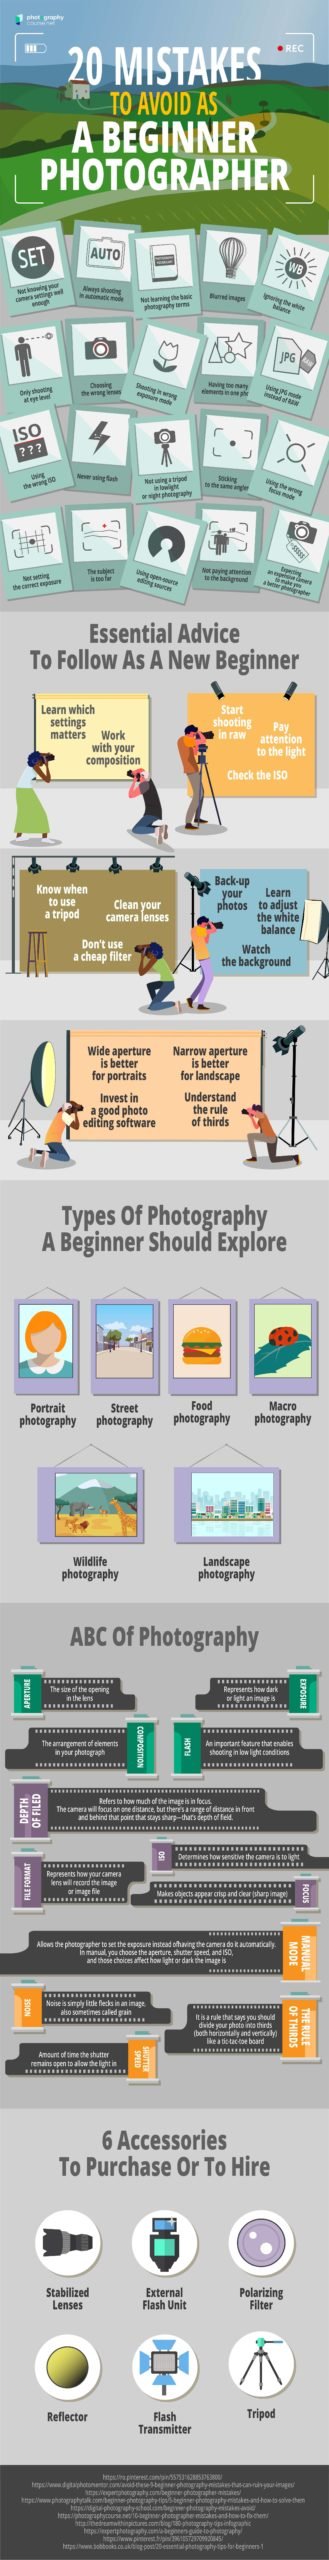 photography mistakes infographic.